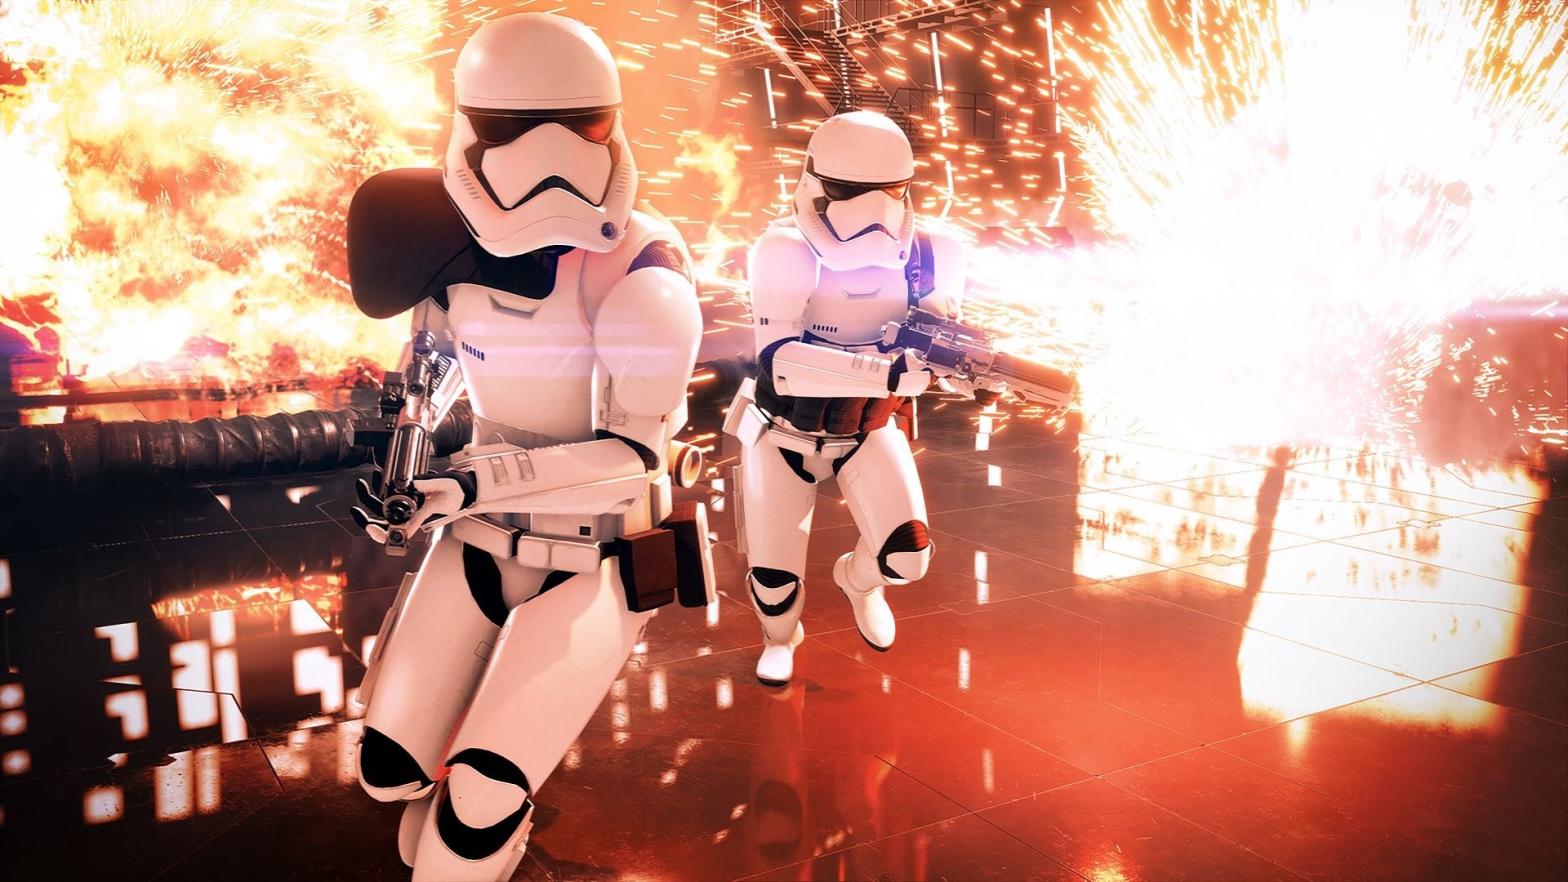 How do you kill inaccurate stormtroopers when they have 1 HP but won't die? (Image: EA / DICE)